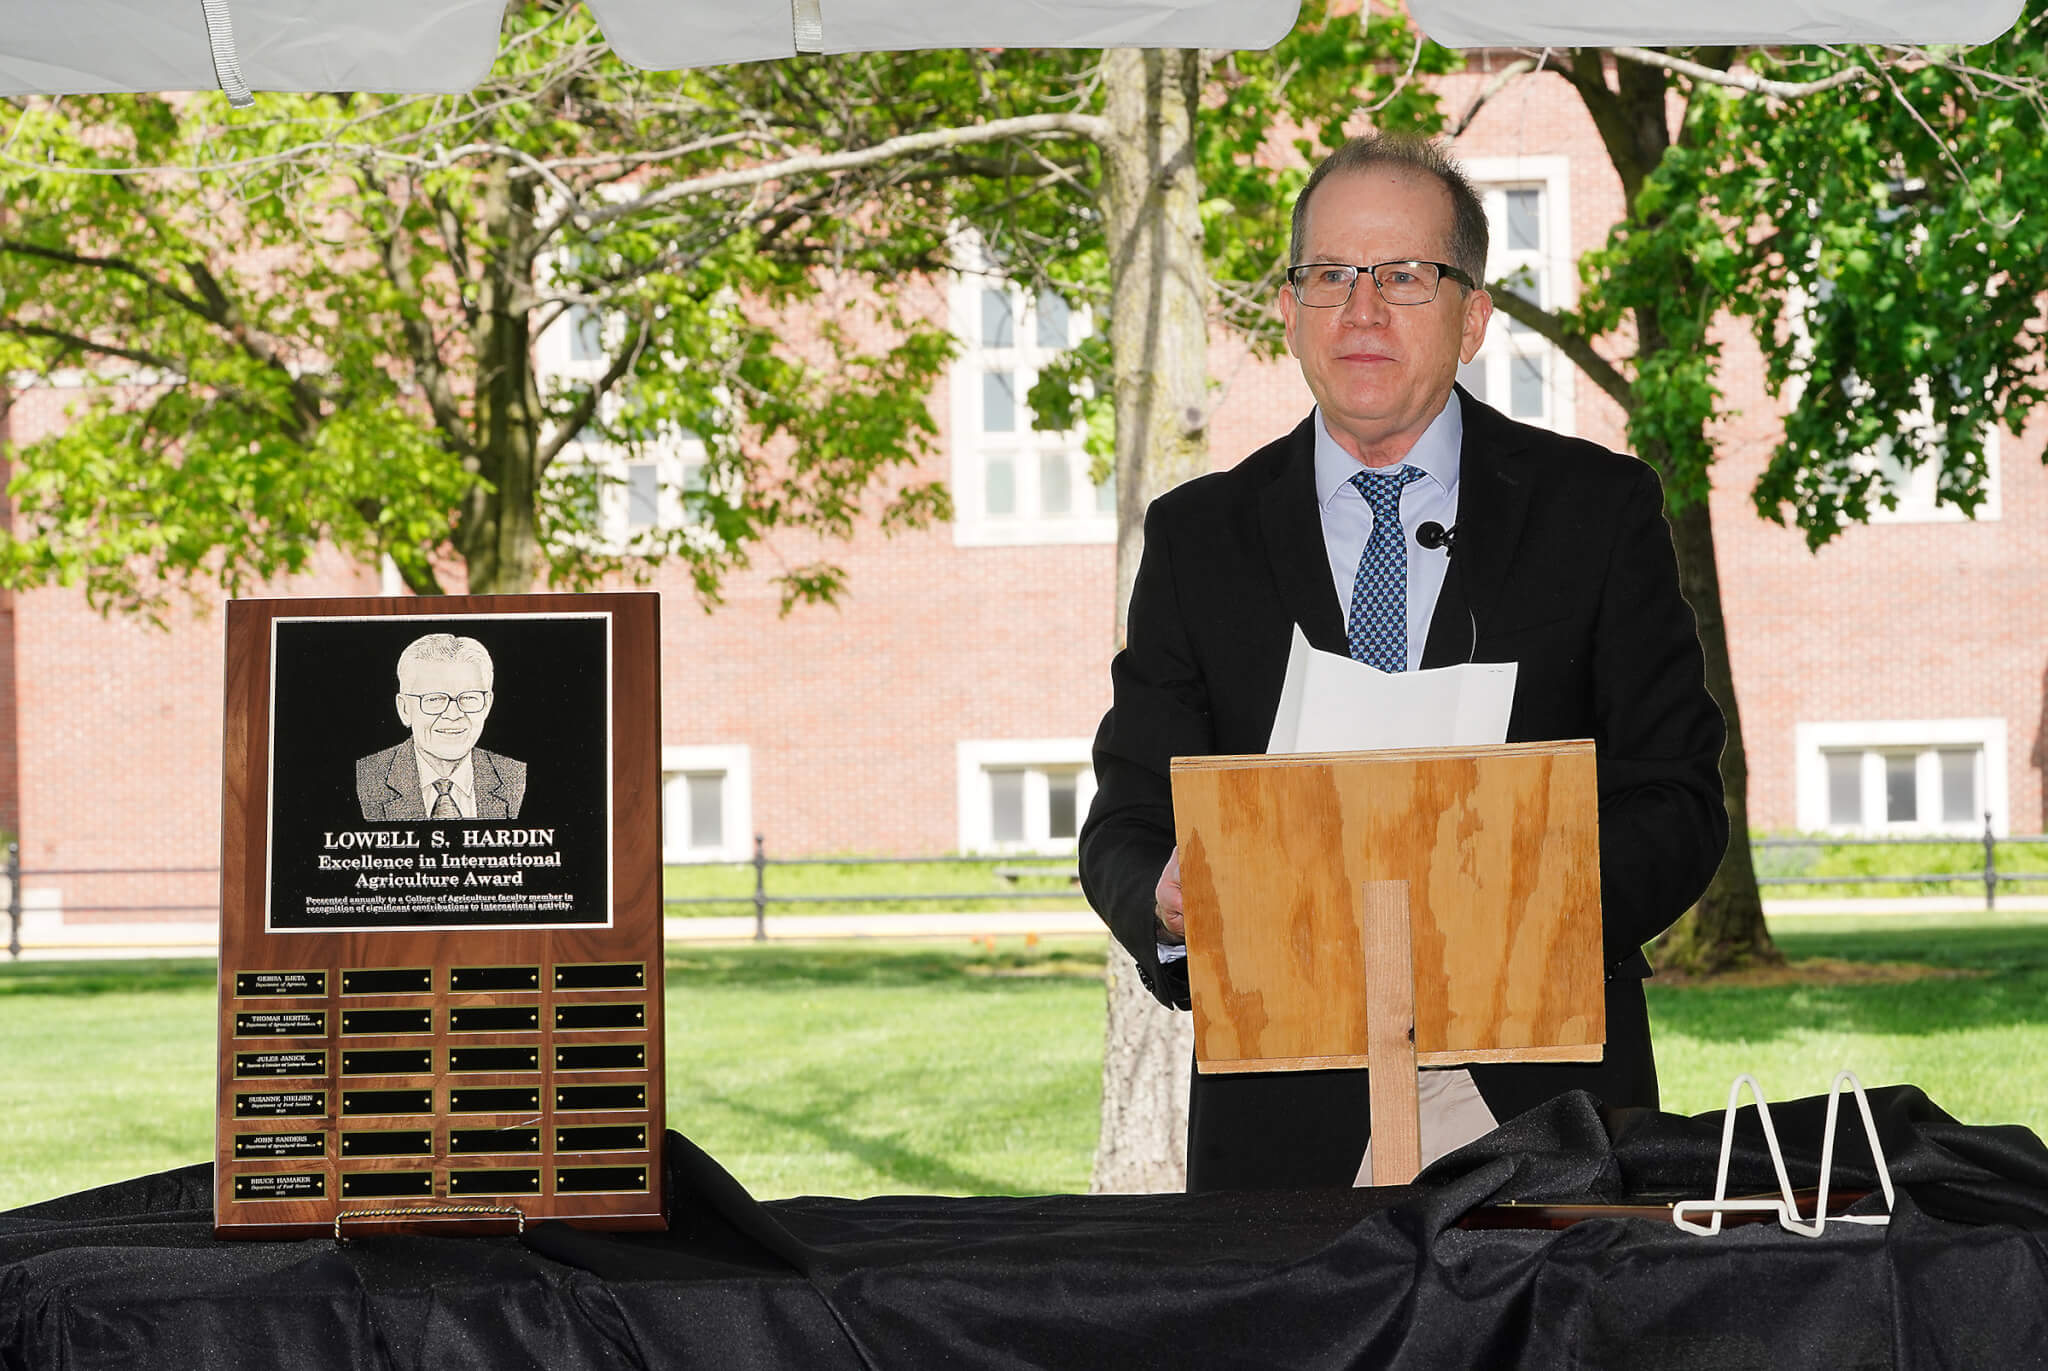 Bruce Hamaker acceting the 2021 Lowell S. Hardin Award for Excellence in International Agriculture,